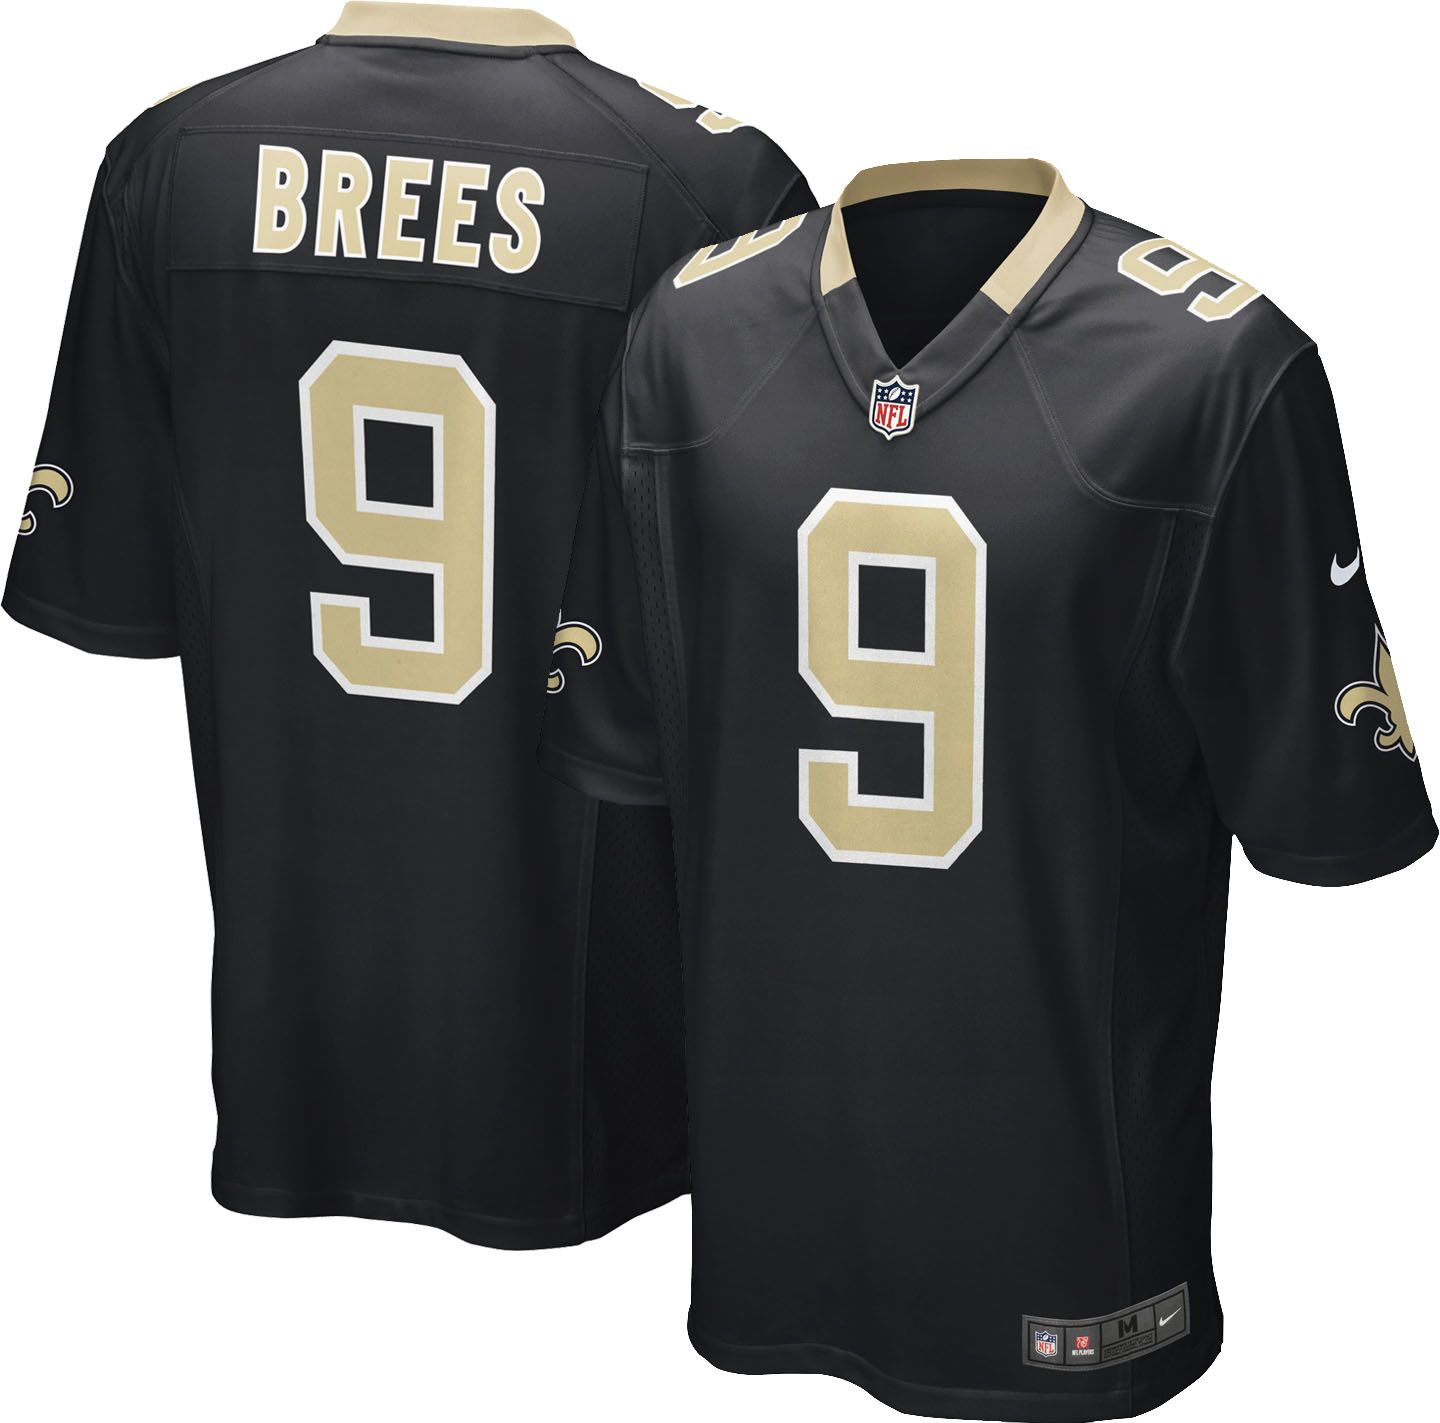 brees jersey Online Shopping for Sports 